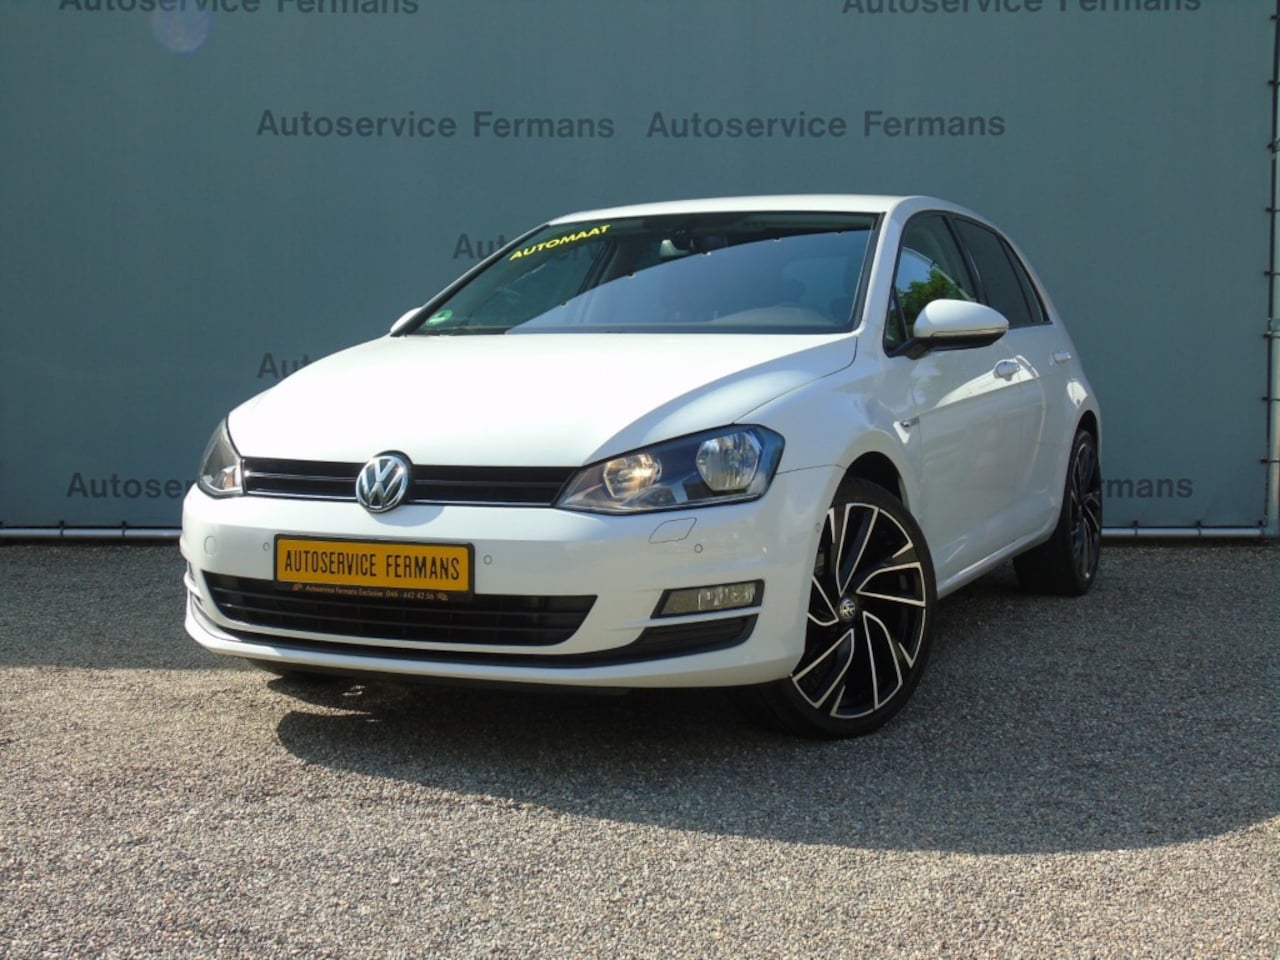 Car Volkswagen Golf 7 TSI Highline Cup Edition from Netherlands, 5000 EUR  for sale - ID: 7674454